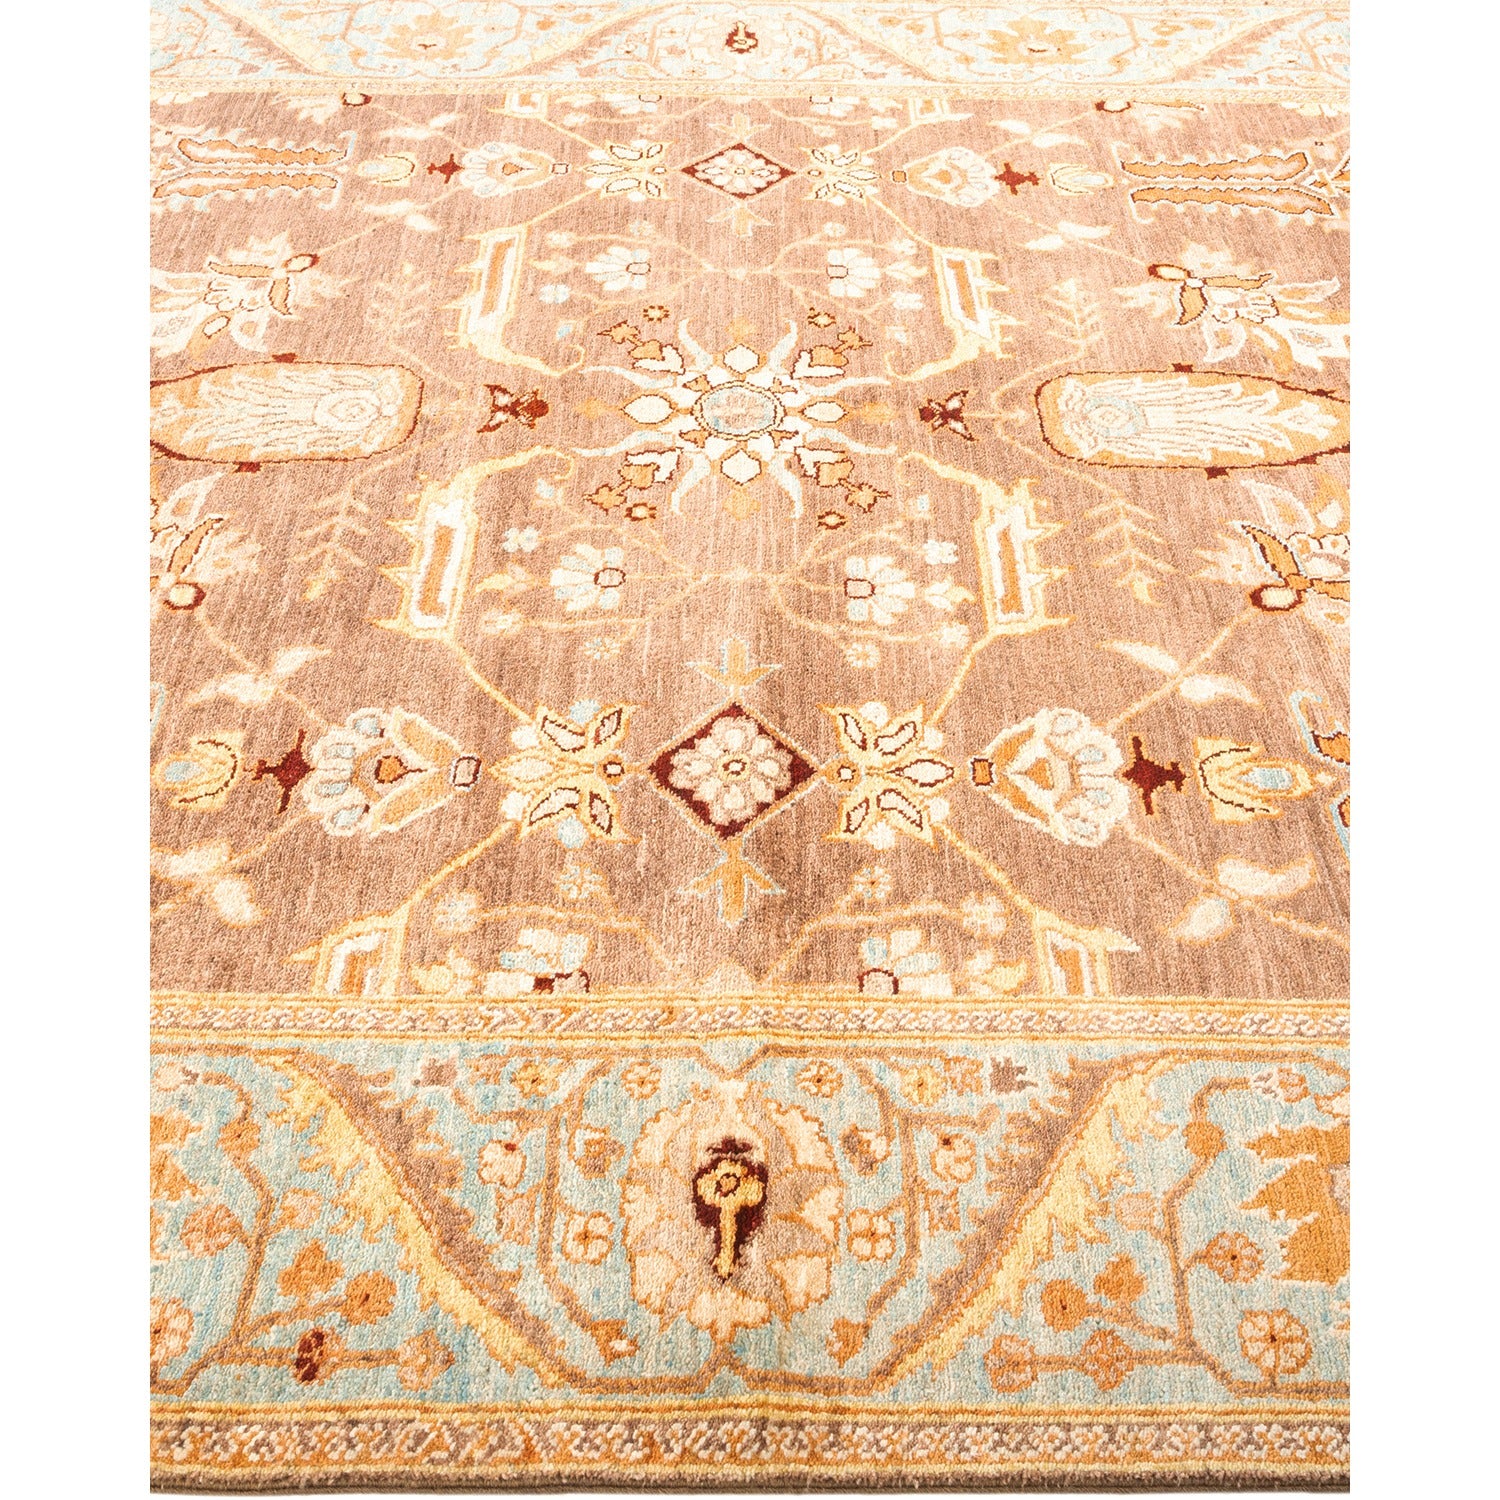 Exquisite vintage-inspired rug with intricate patterns and muted color palette.